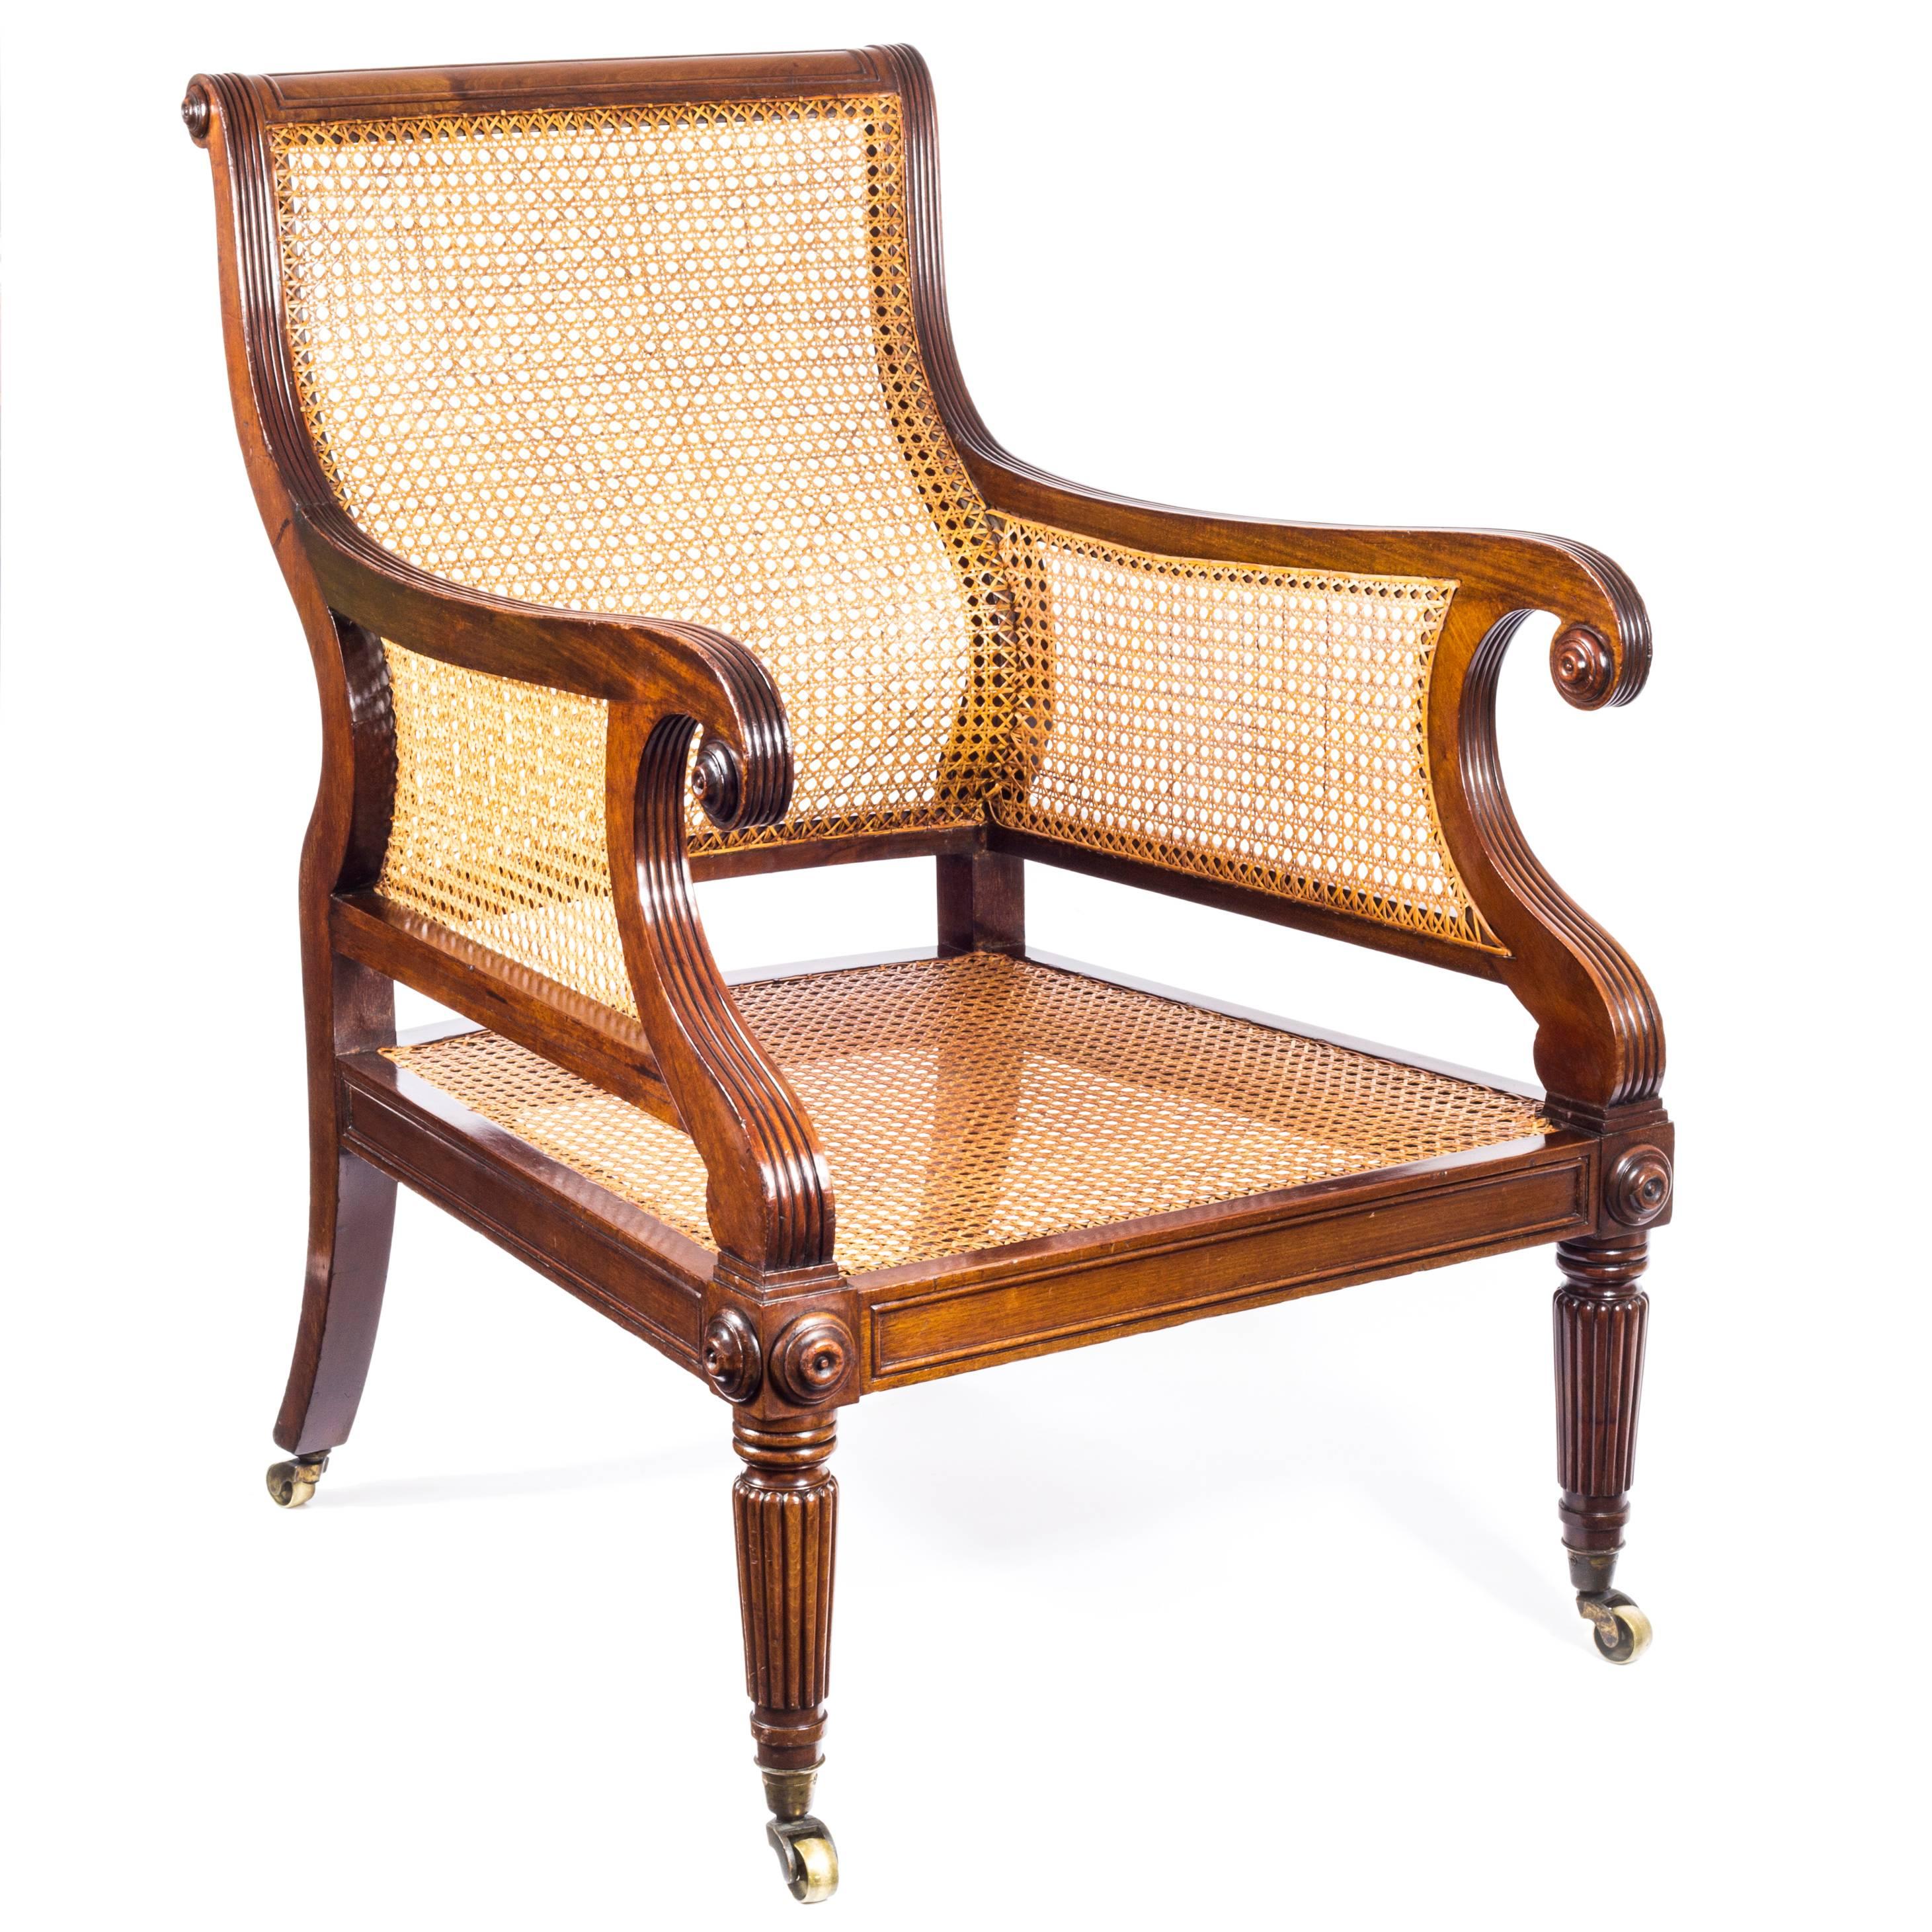 Cane English Regency Mahogany Library Bergère Armchair Attributed to Gillows